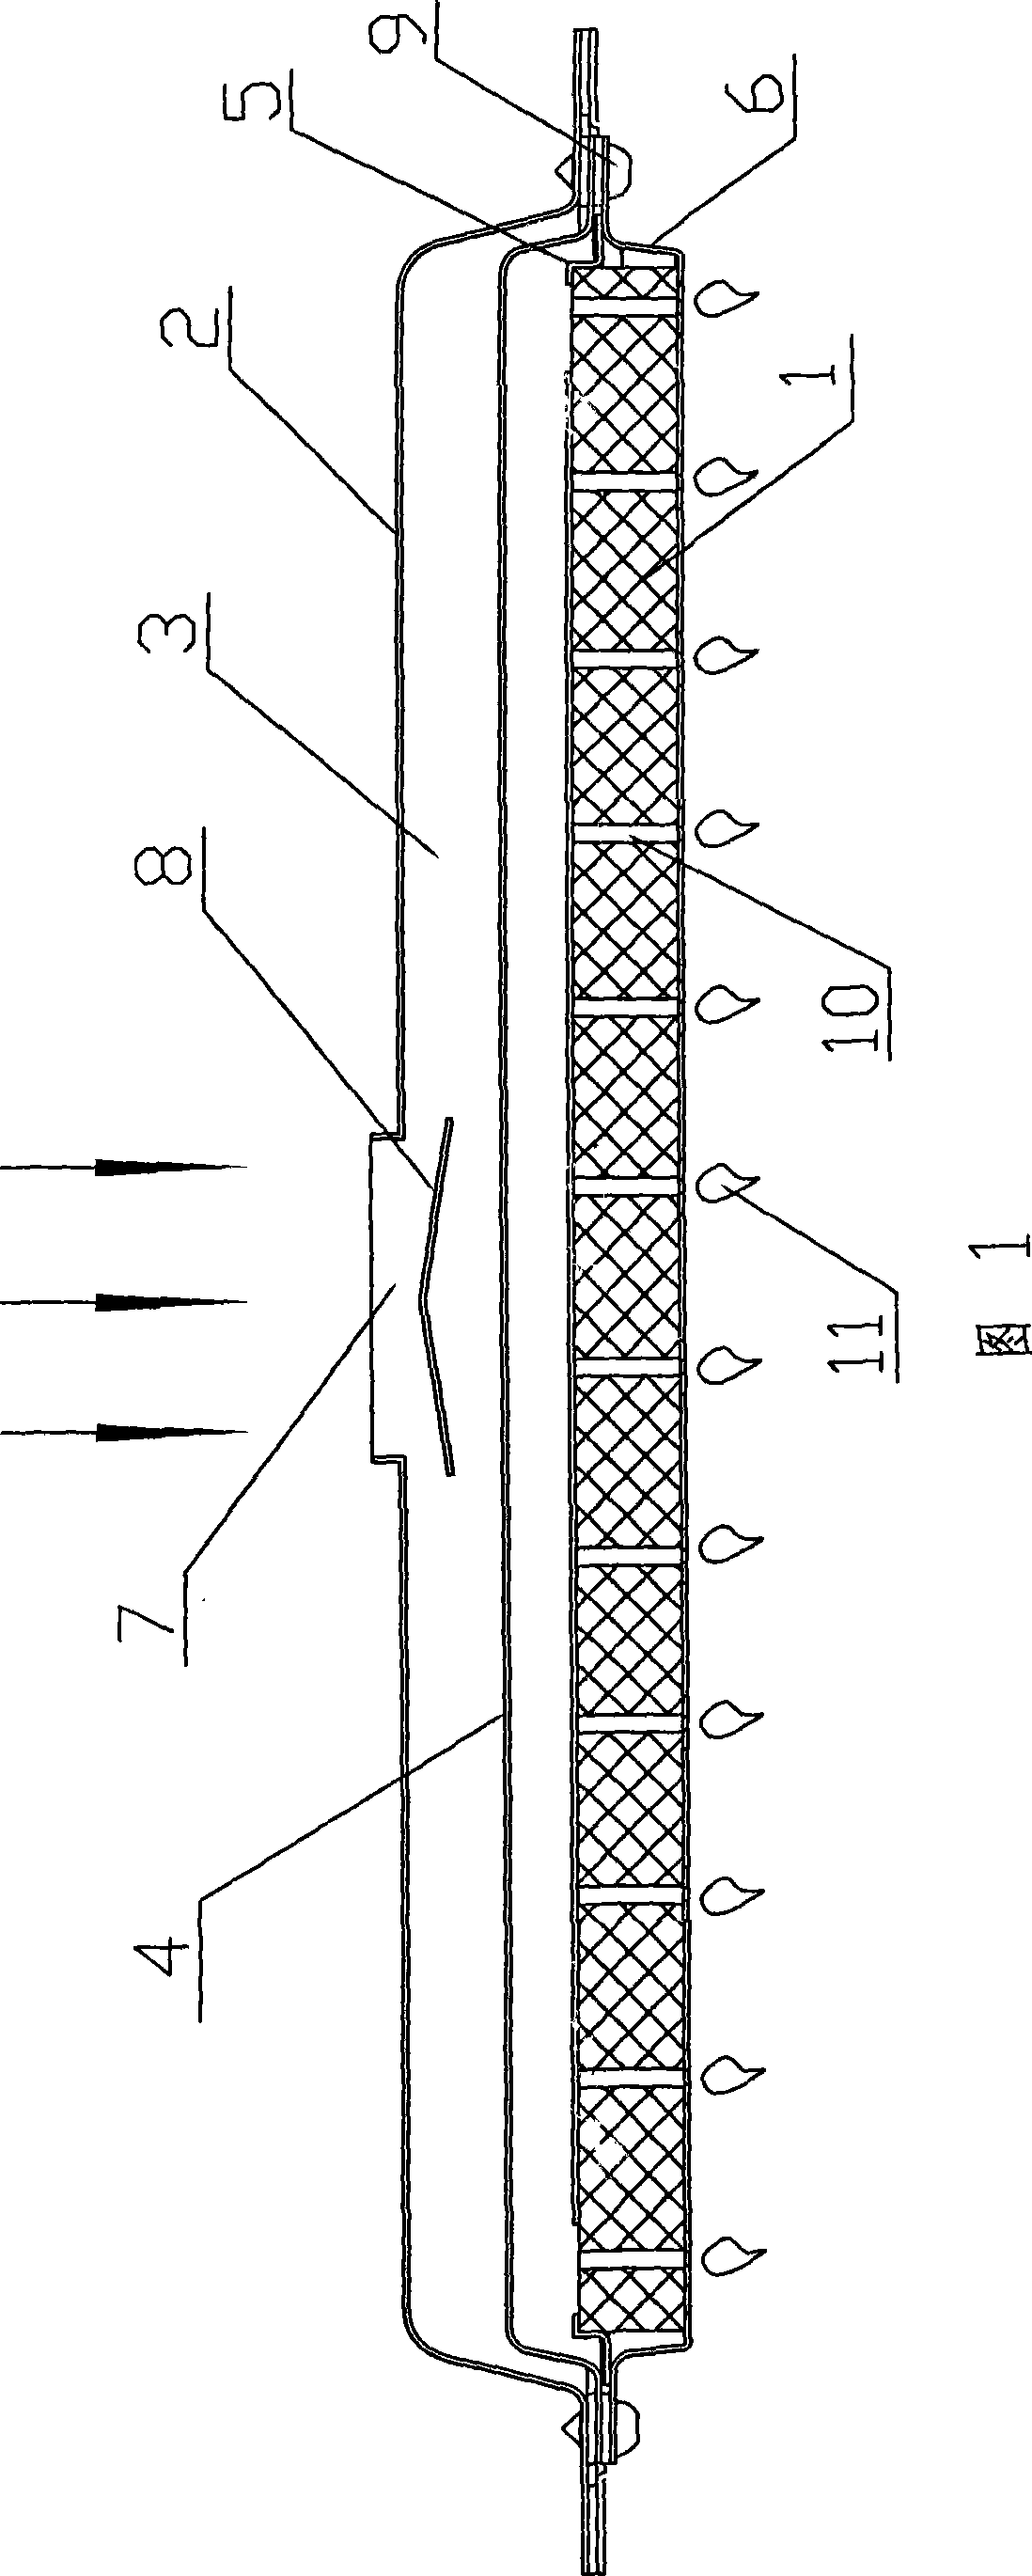 Fully pre-mixing gas combustion burner device